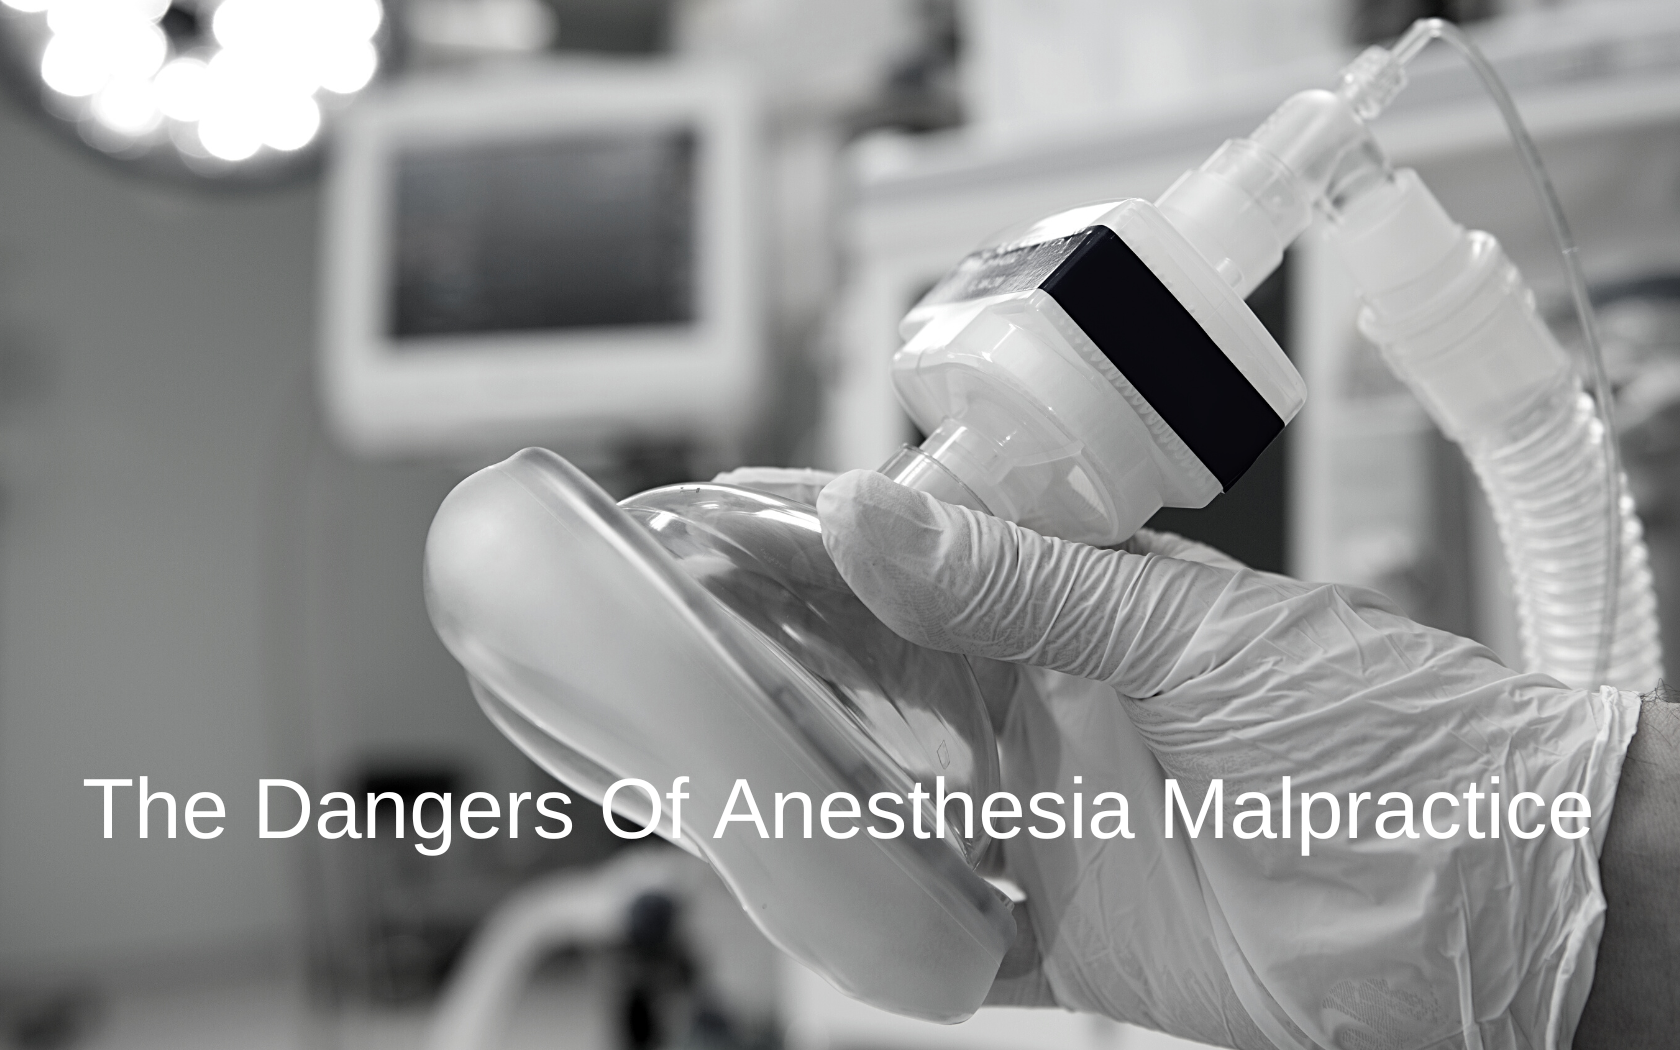 Brain damage from anesthesia can be very dangerous.